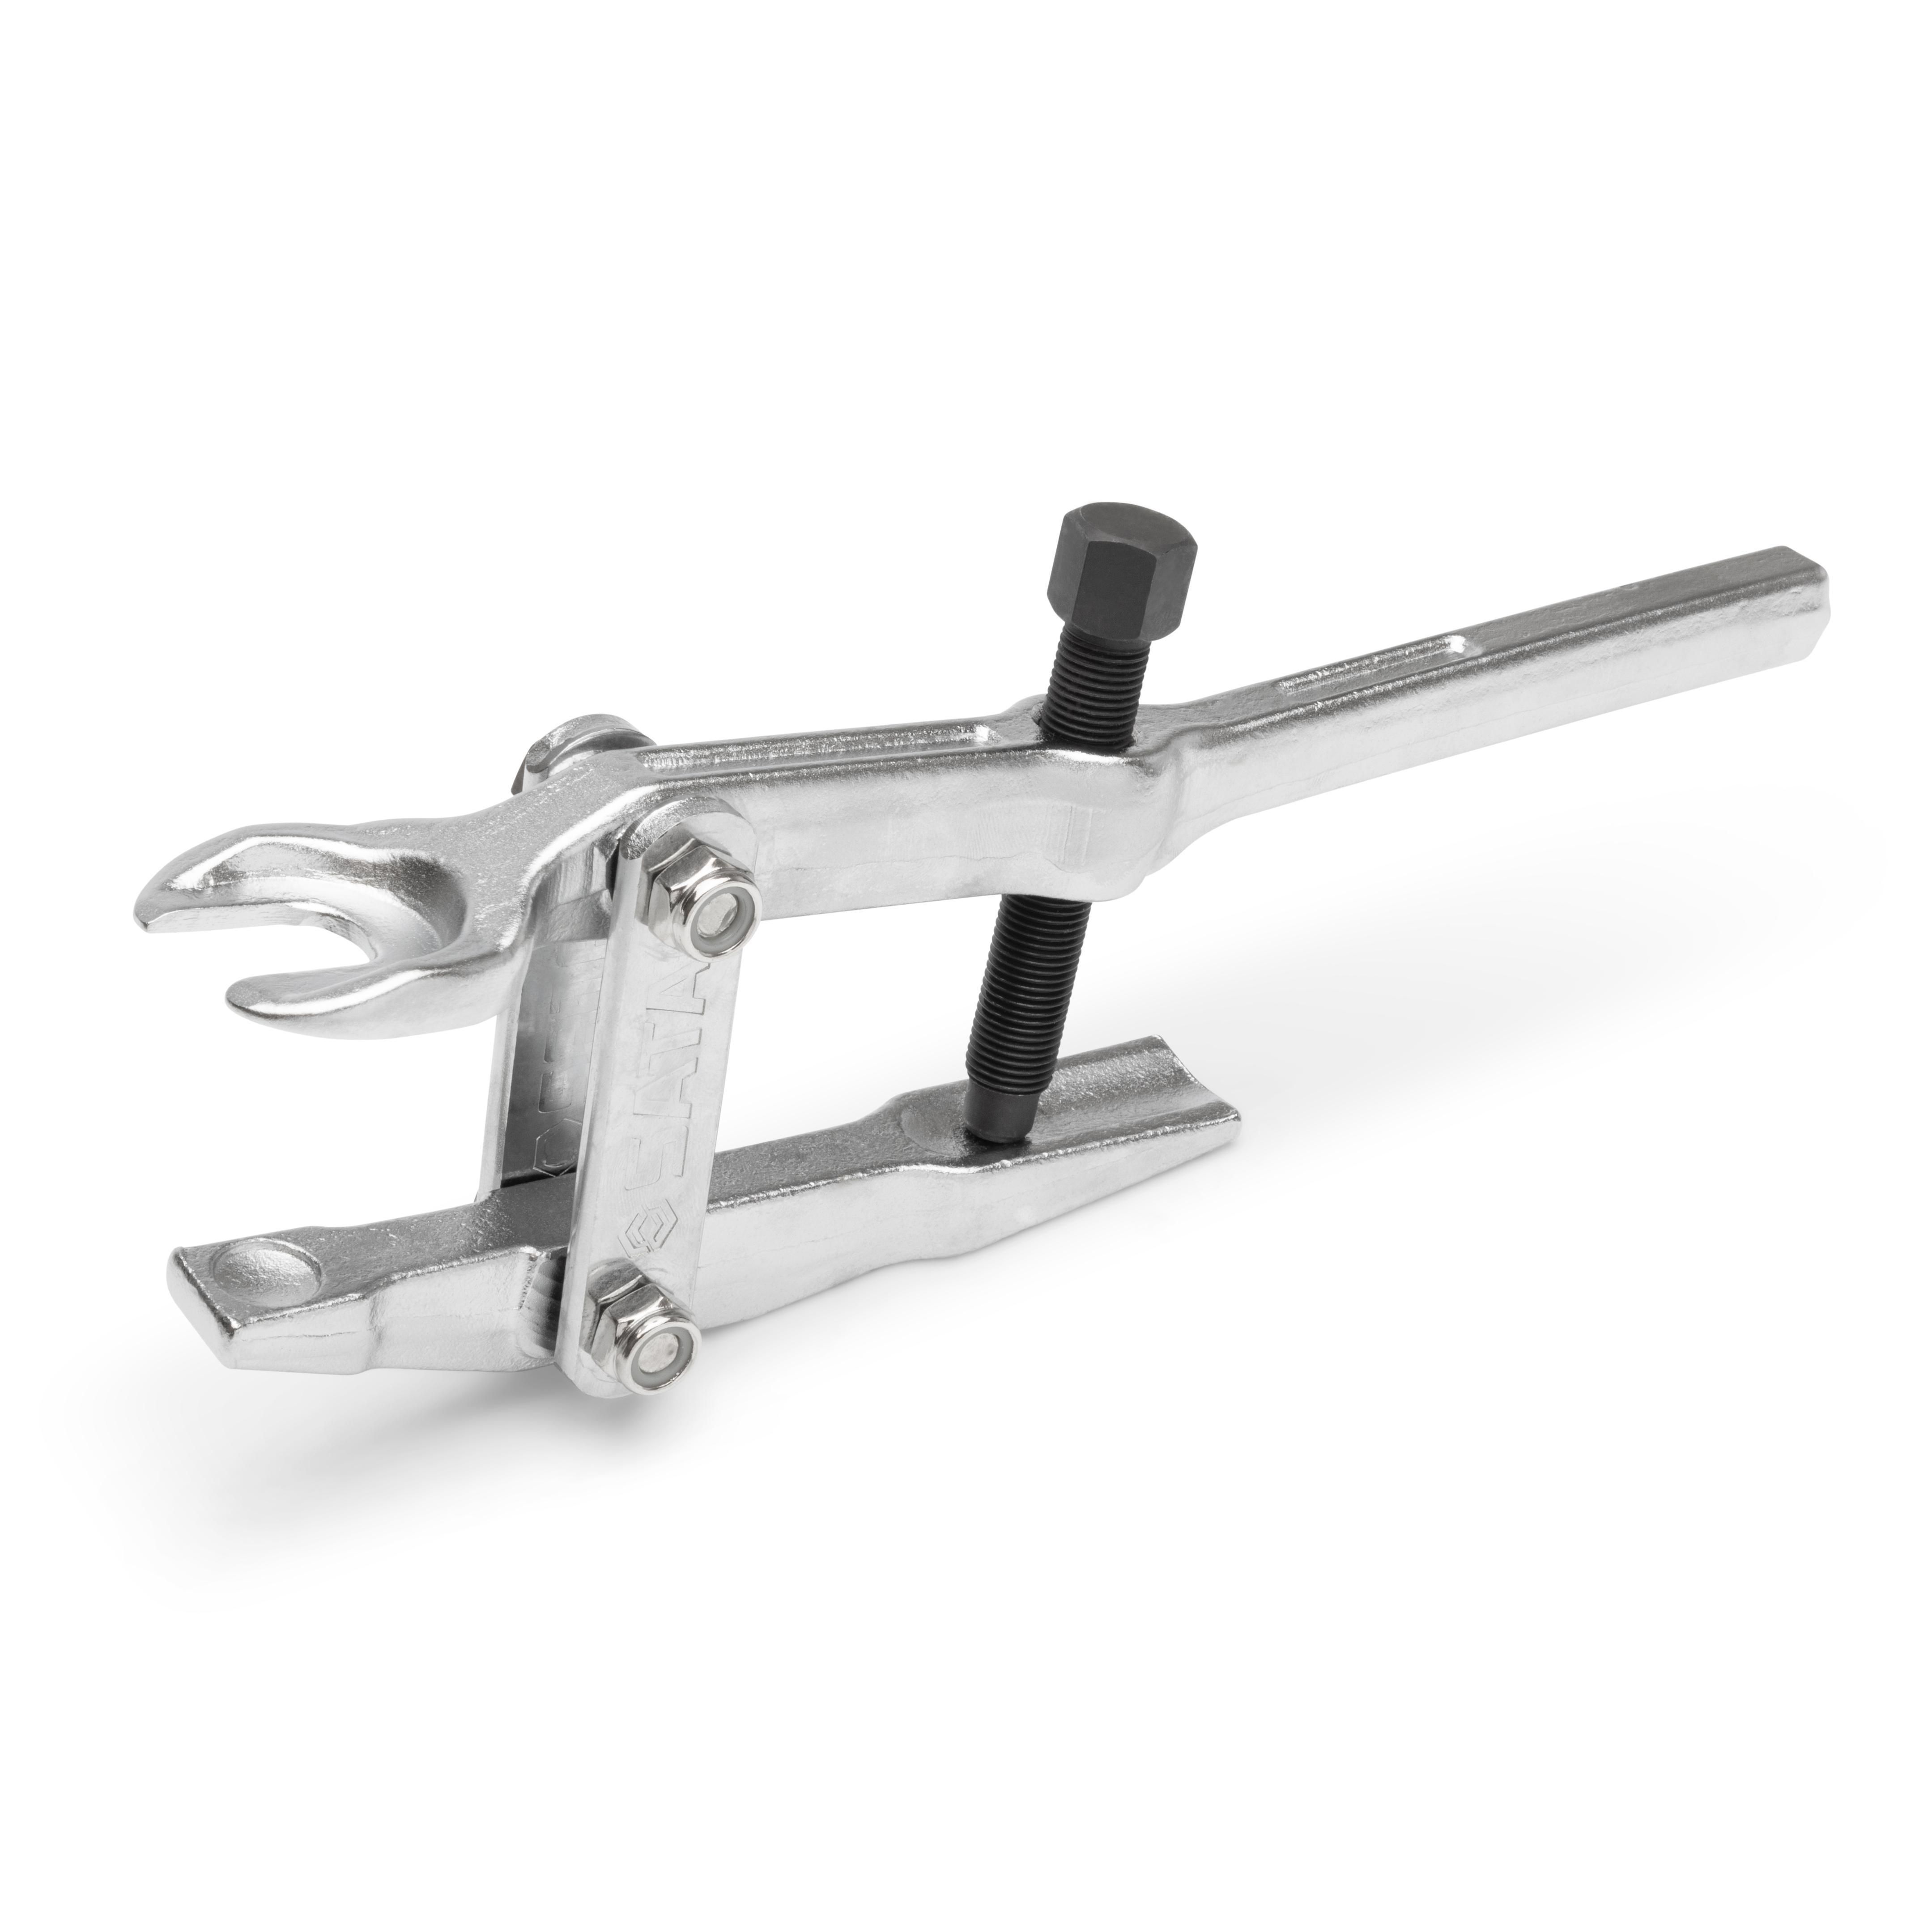 Shop Ball Joint Separators Auto Specialty Tools from SATA